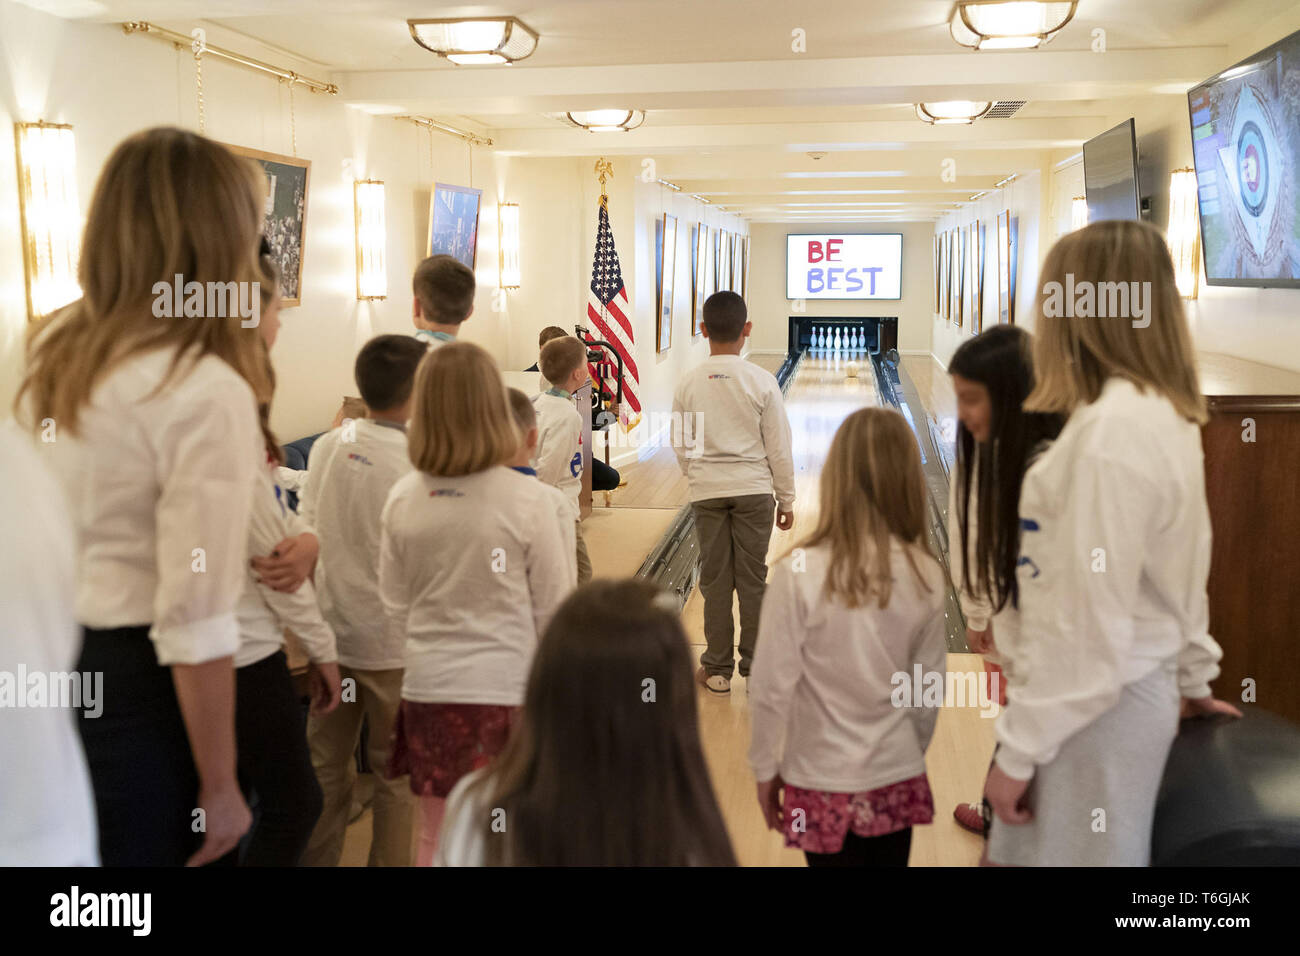 Washington DC, USA. 01st May, 2019. First Lady Melania Trump welcomed children from her United States Secret Service detail to spend an afternoon bowling inside the newly renovated bowling alley at the White House. The White House Bowling Alley, located in the Residence, was first installed in 1973 during the Nixon Administration.  Since it’s installation, many presidents and first families have enjoyed use of the bowling alley.   The original 1973 design lasted until 1994 under the Clinton Administration, which oversaw the last major renovation. Credit: Storms Media Group/Alamy Live News Stock Photo